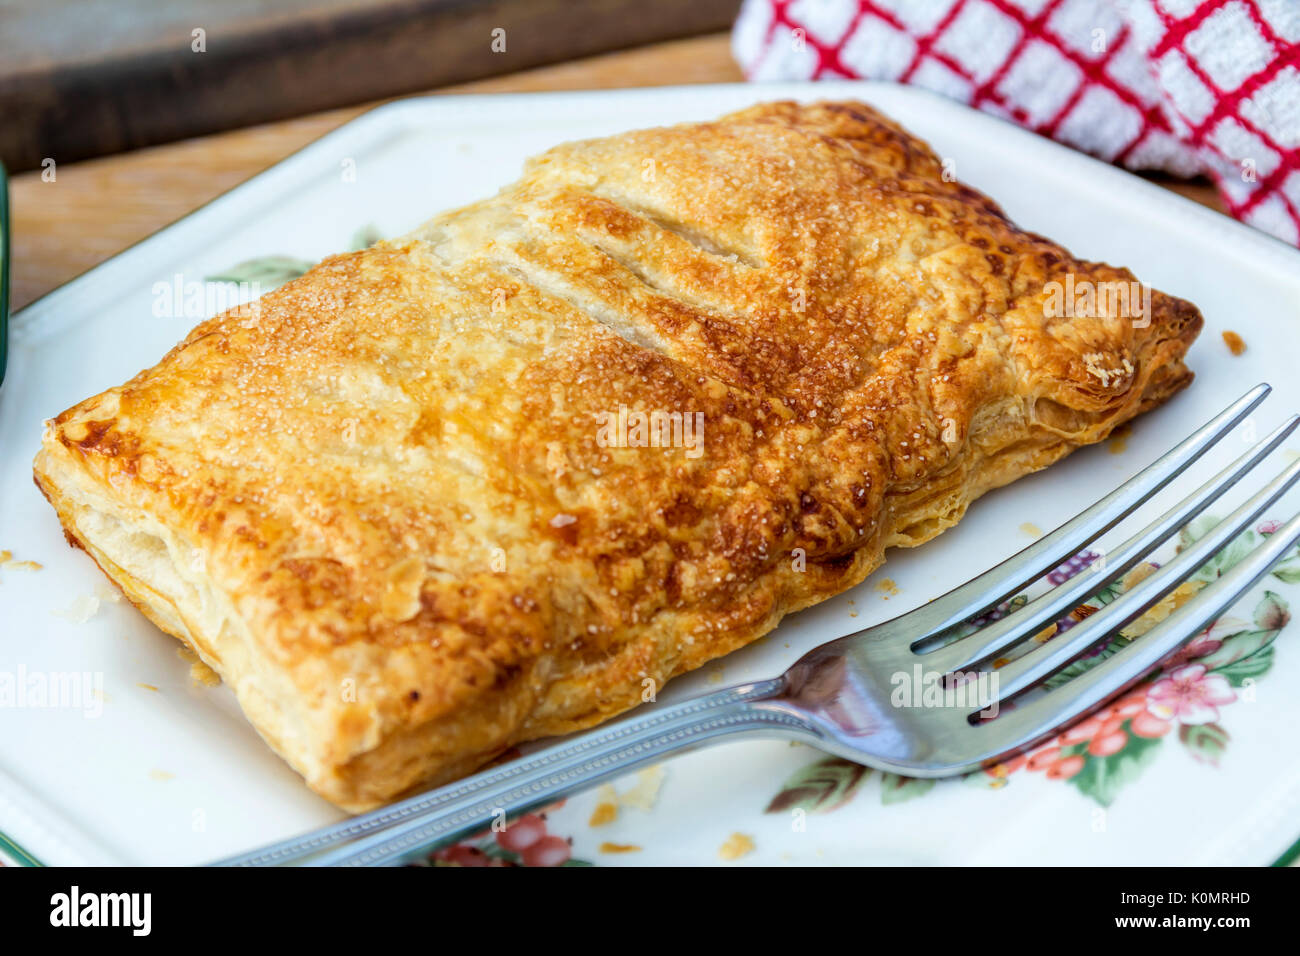 A closeup of a single Apple pastry served onto a side plate, with a red and white kitchen cloth to the top part of the image Stock Photo